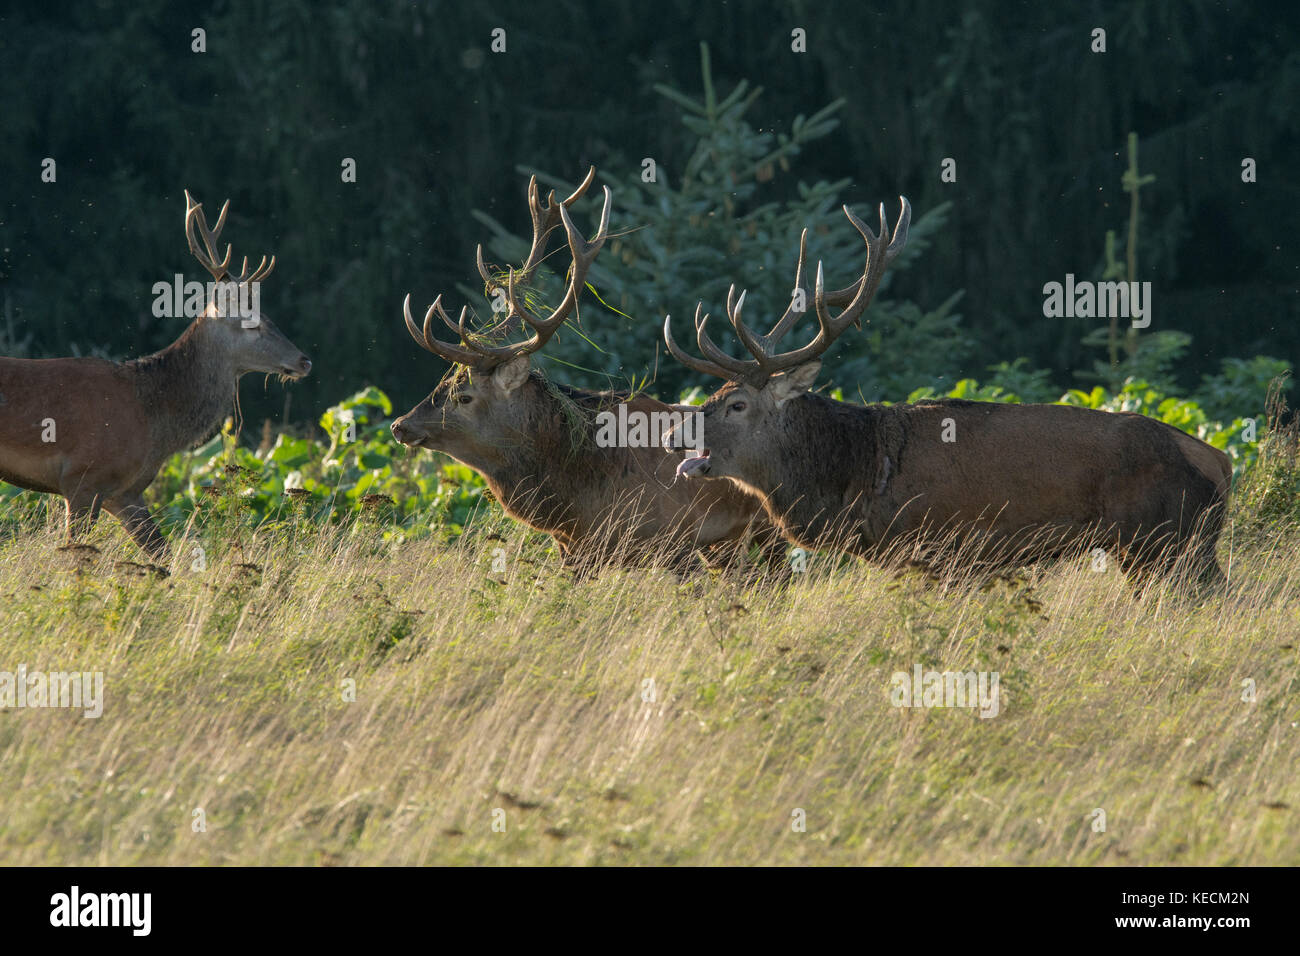 Old stags in mating season Stock Photo